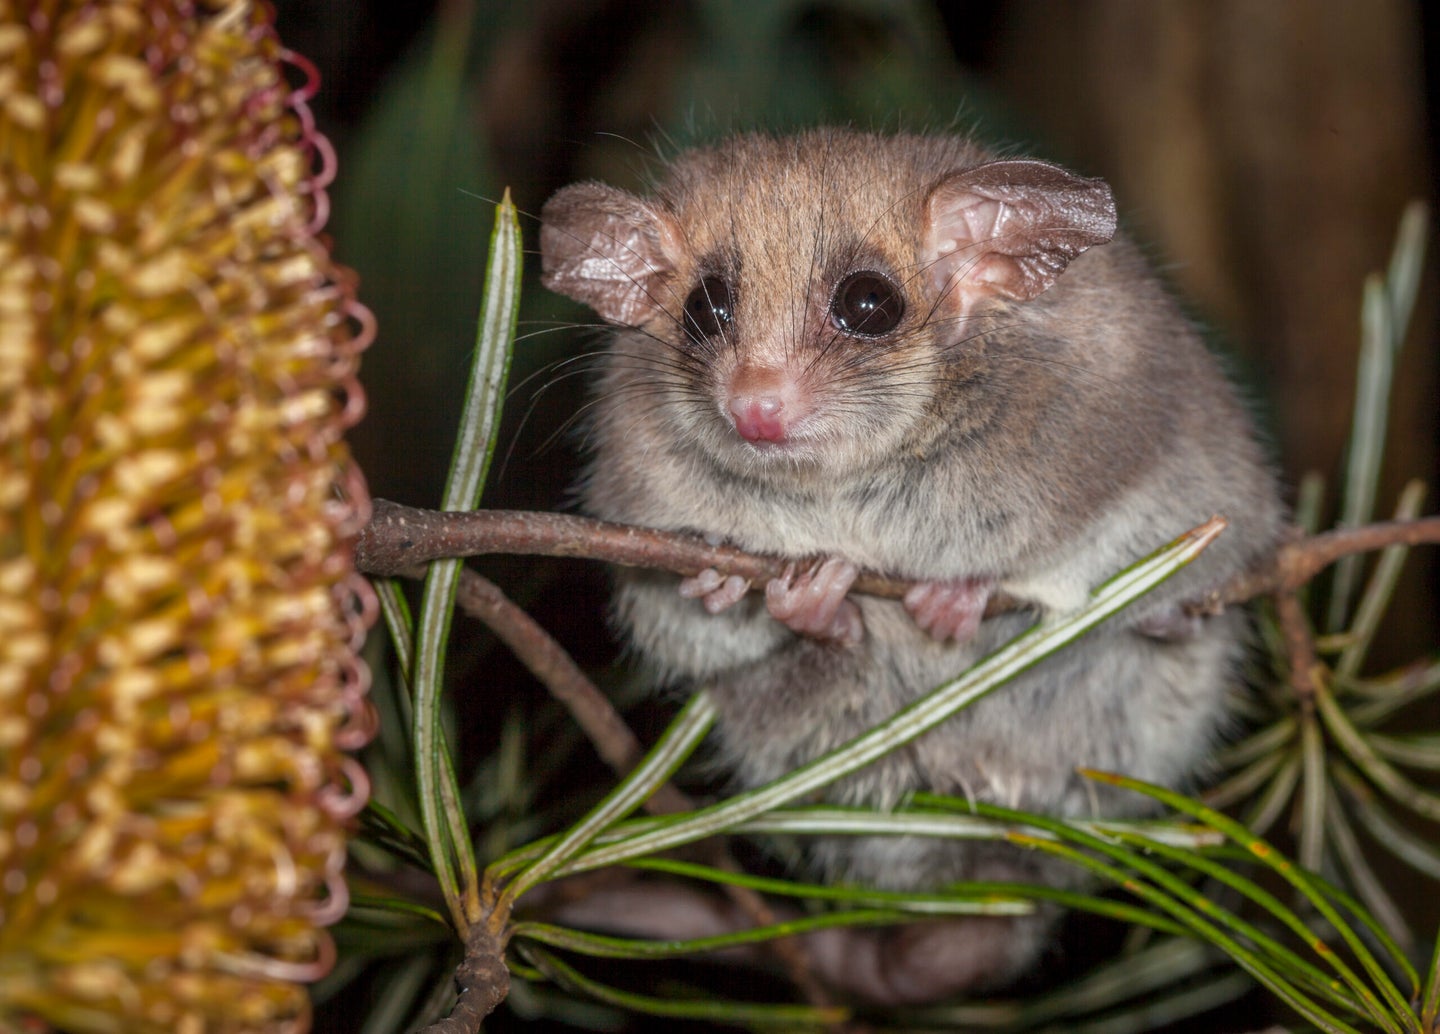 Pygmy possums can smell smoke and start moving while still emerging from torpor. These abilities may help them survive bushfires.